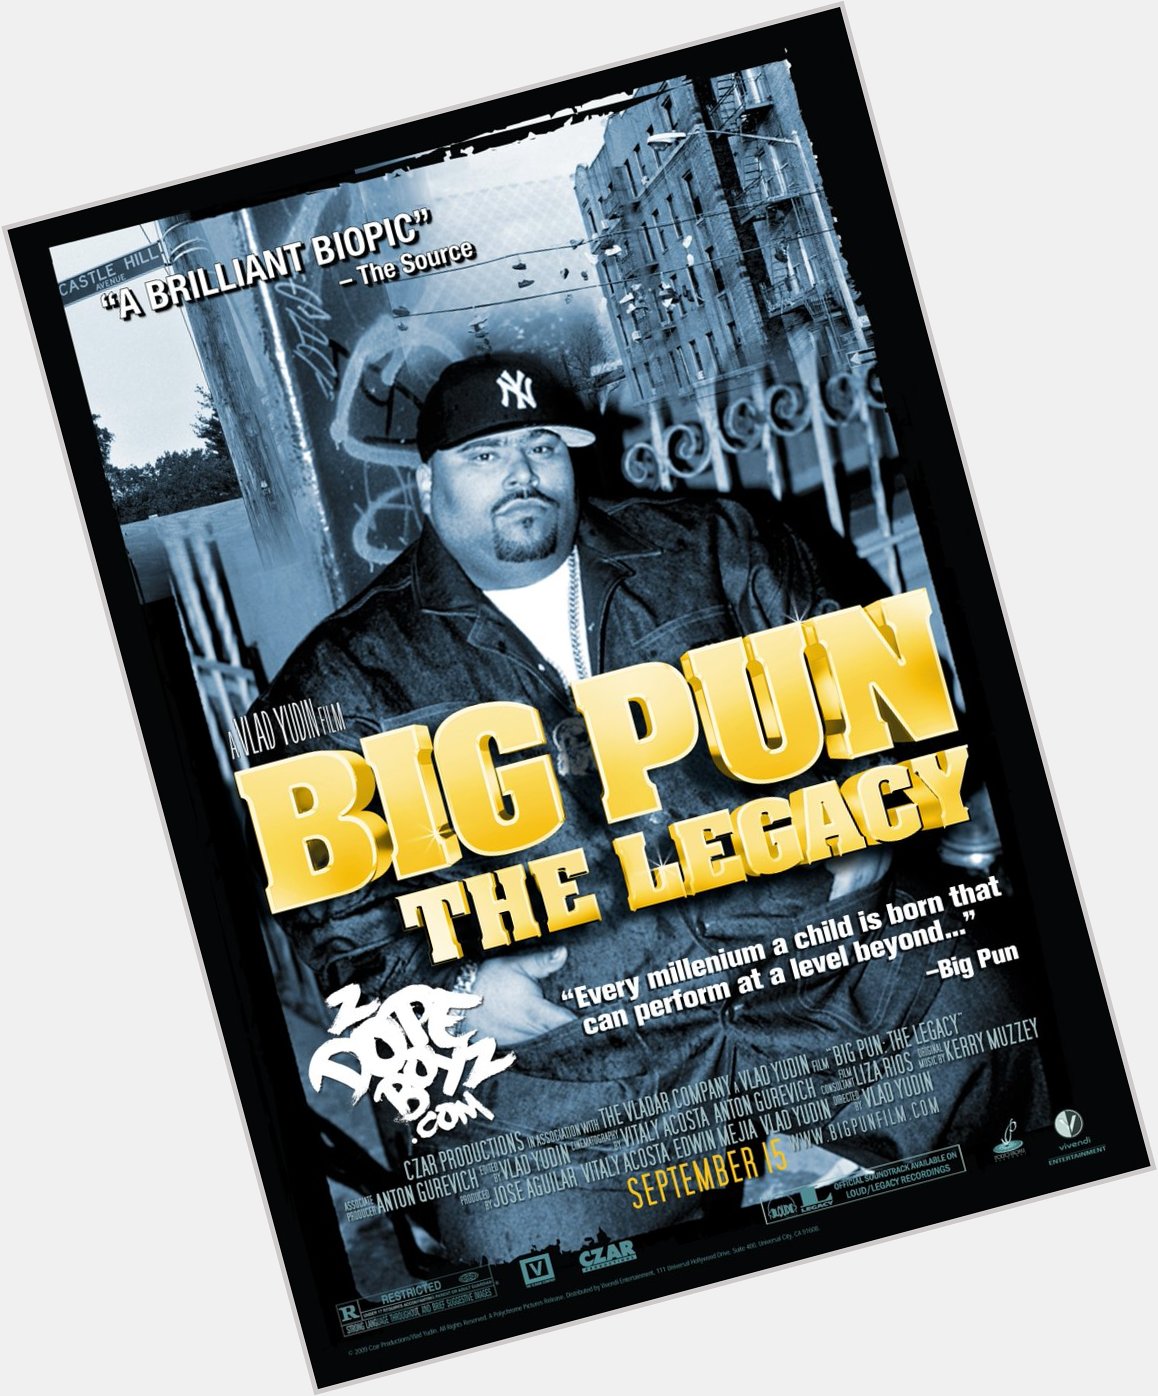 Shouts to for providing the mix  And check out BIG PUN THE LEGACY on iTunes. 